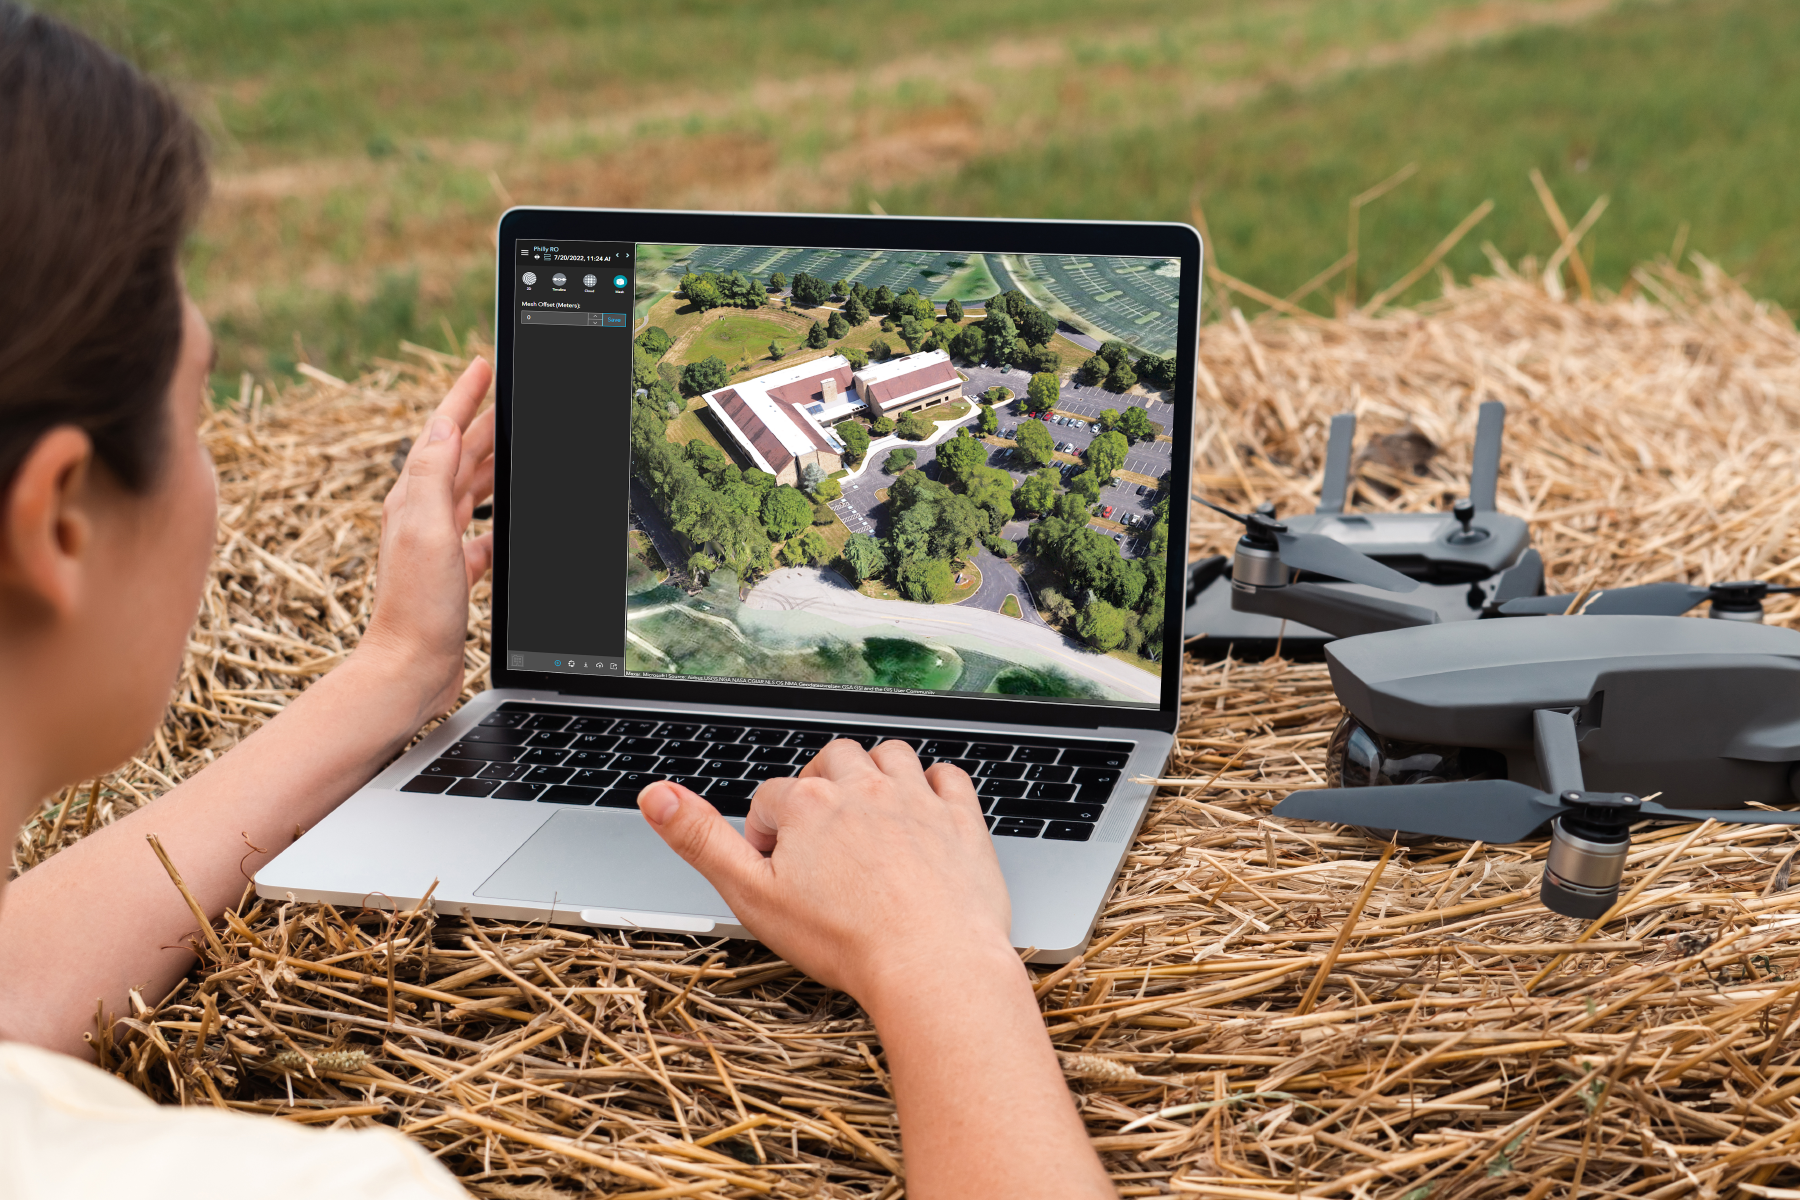 A student in a field next to a drone using a laptop with map image displayed.